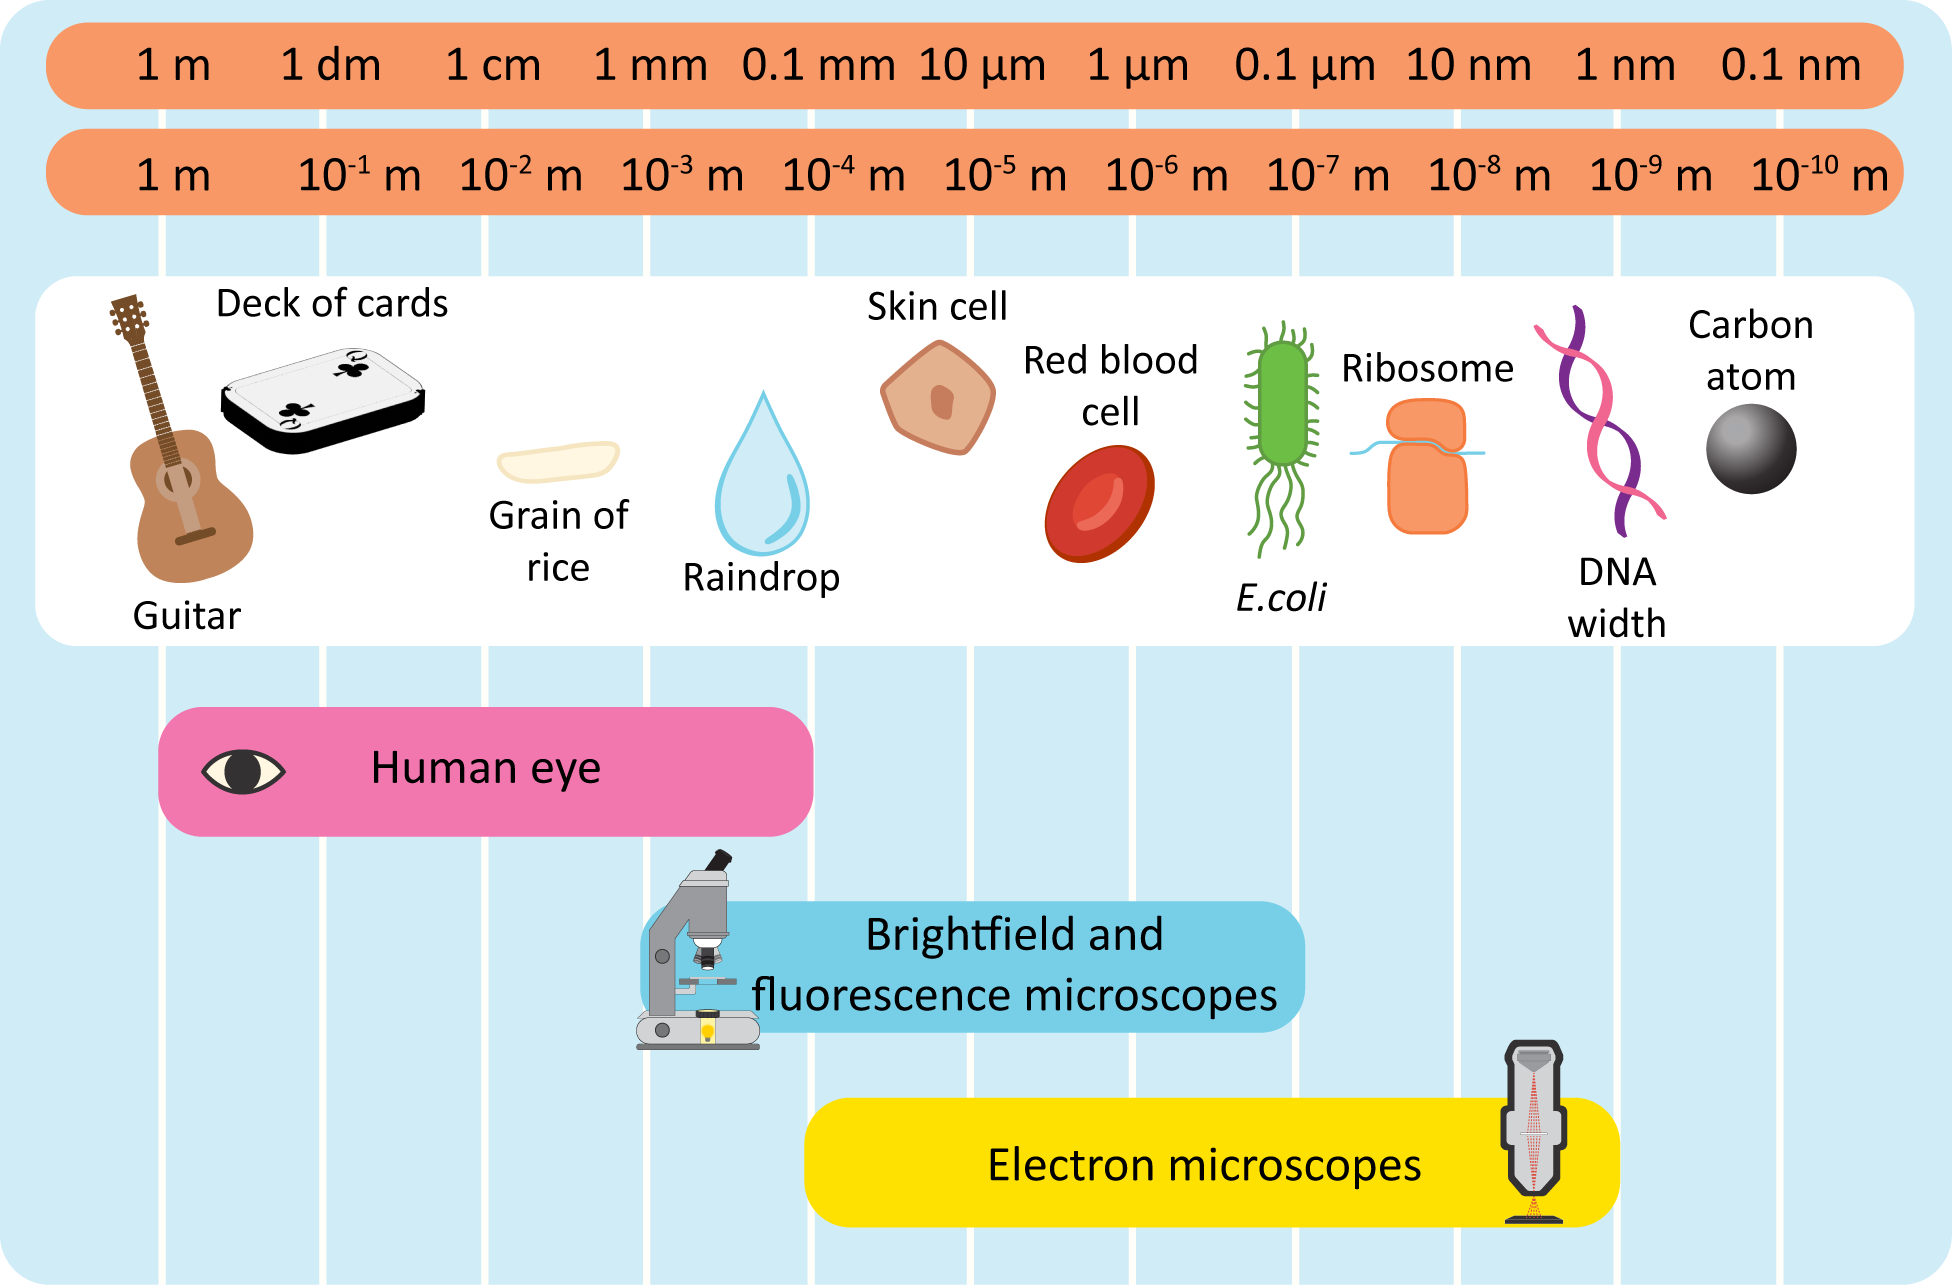 Schematic diagram labeling common objects with the type of microscopy used to see them.